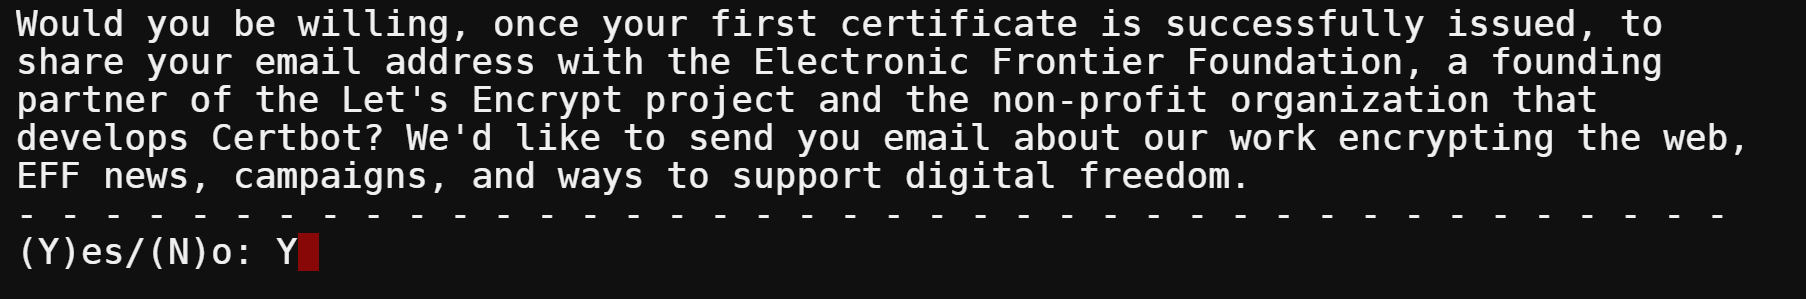 Sharing your email address with the Electronic Frontier Foundation